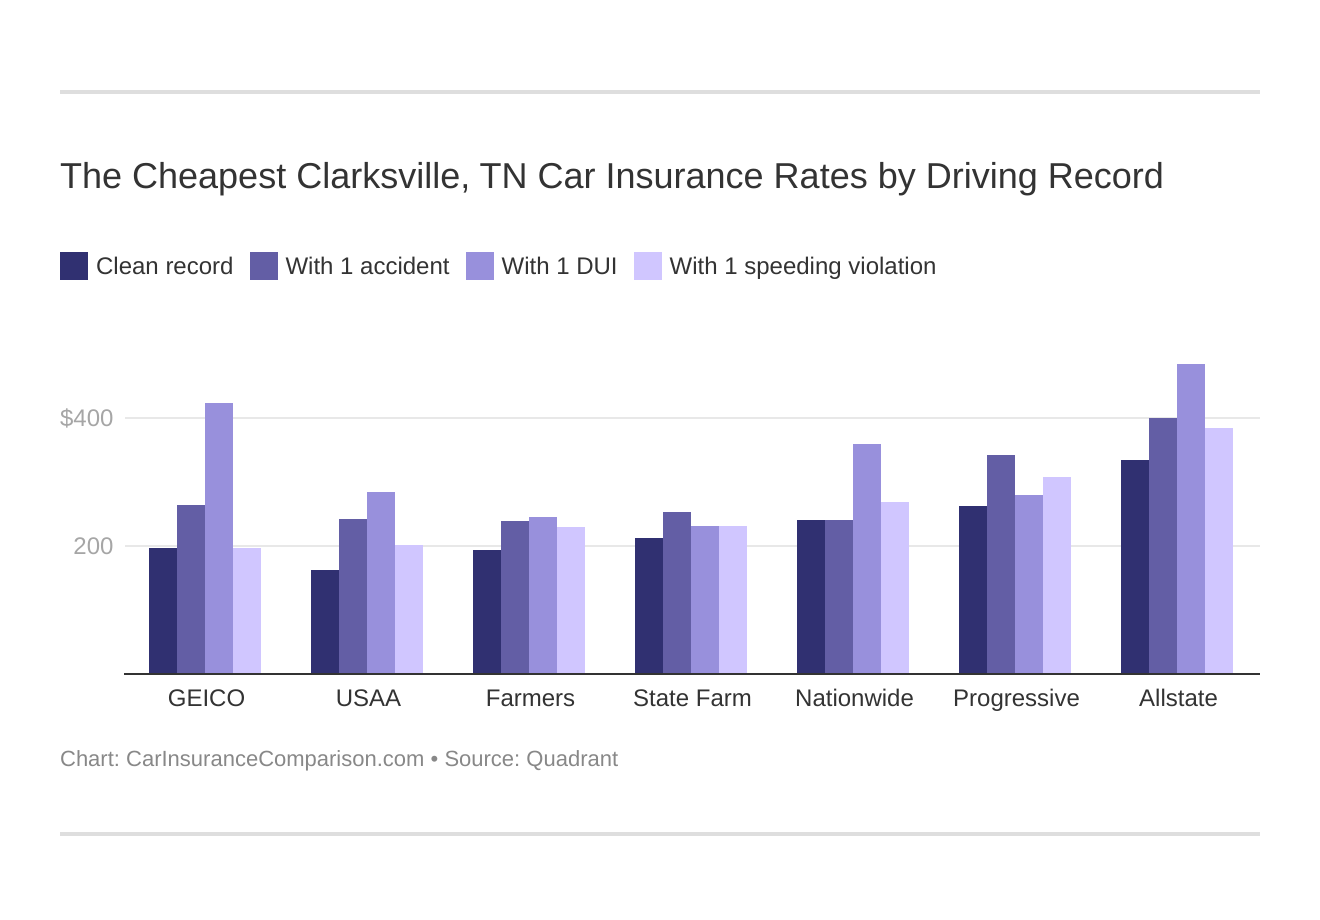 The Cheapest Clarksville, TN Car Insurance Rates by Driving Record